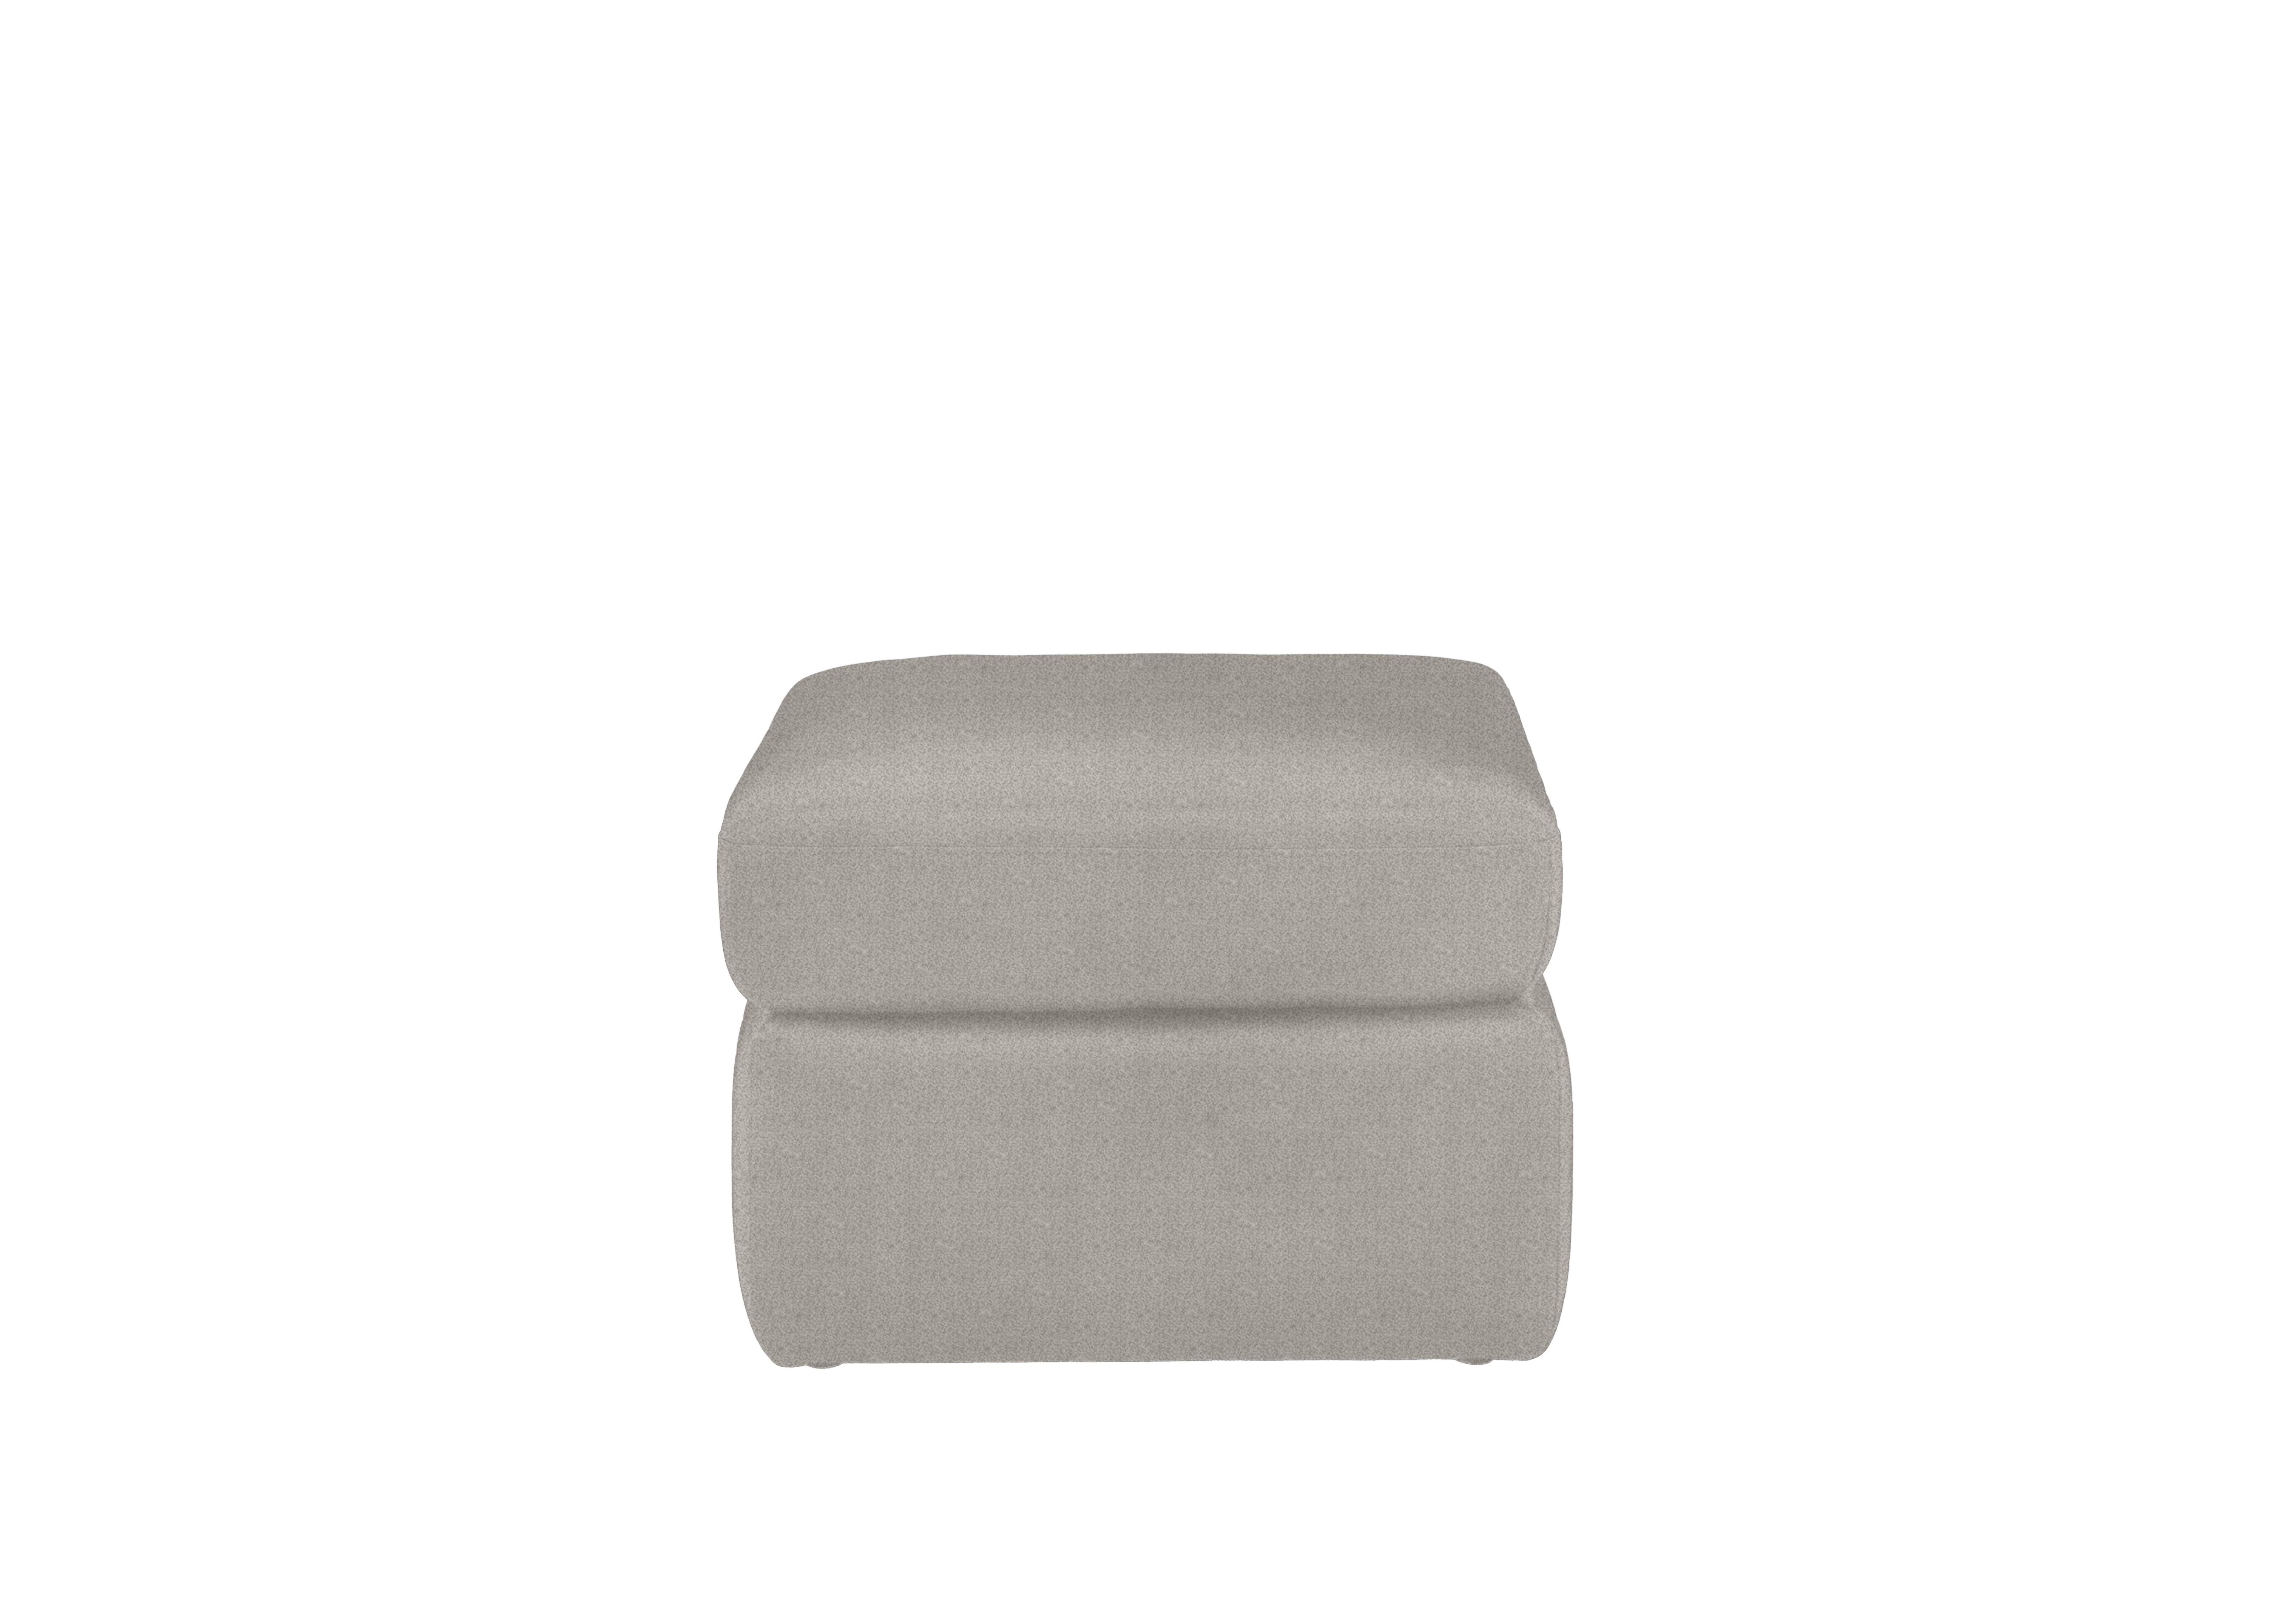 Utah Fabric Storage Footstool in Rosy Light Grey Rs-0102 on Furniture Village